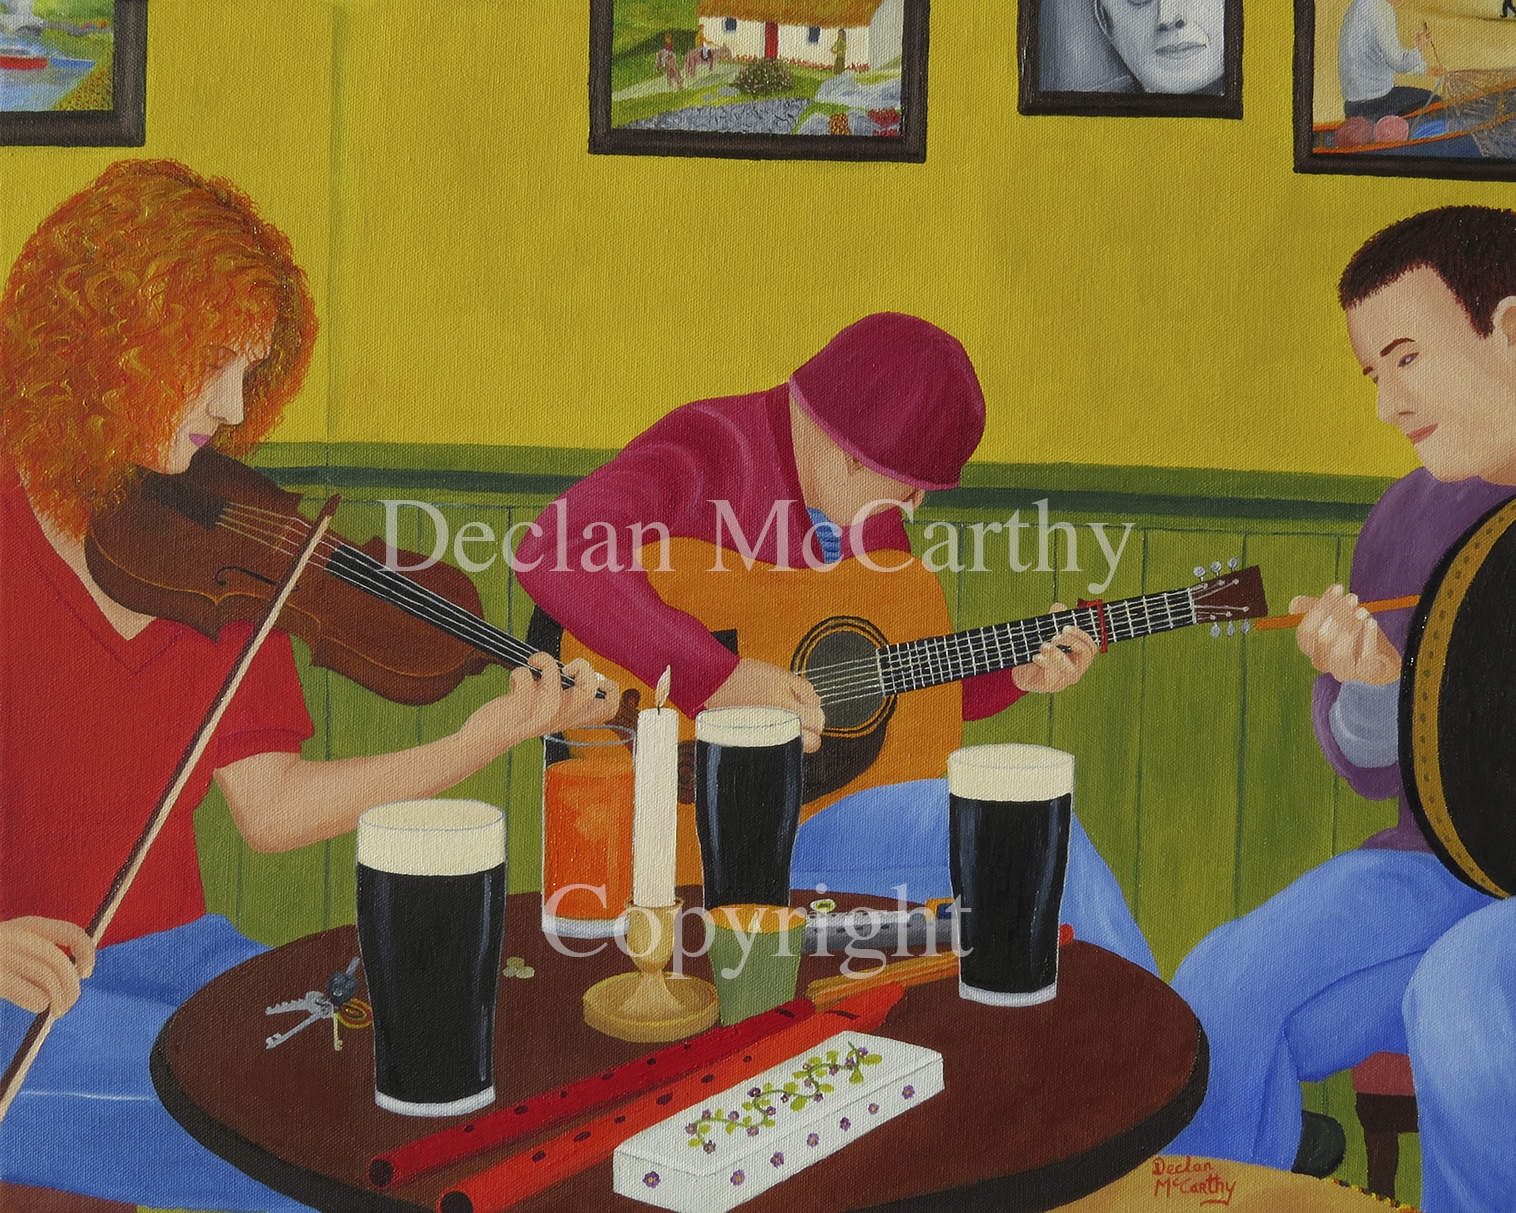 Three musicians playing while awaiting friends to join them for some craic